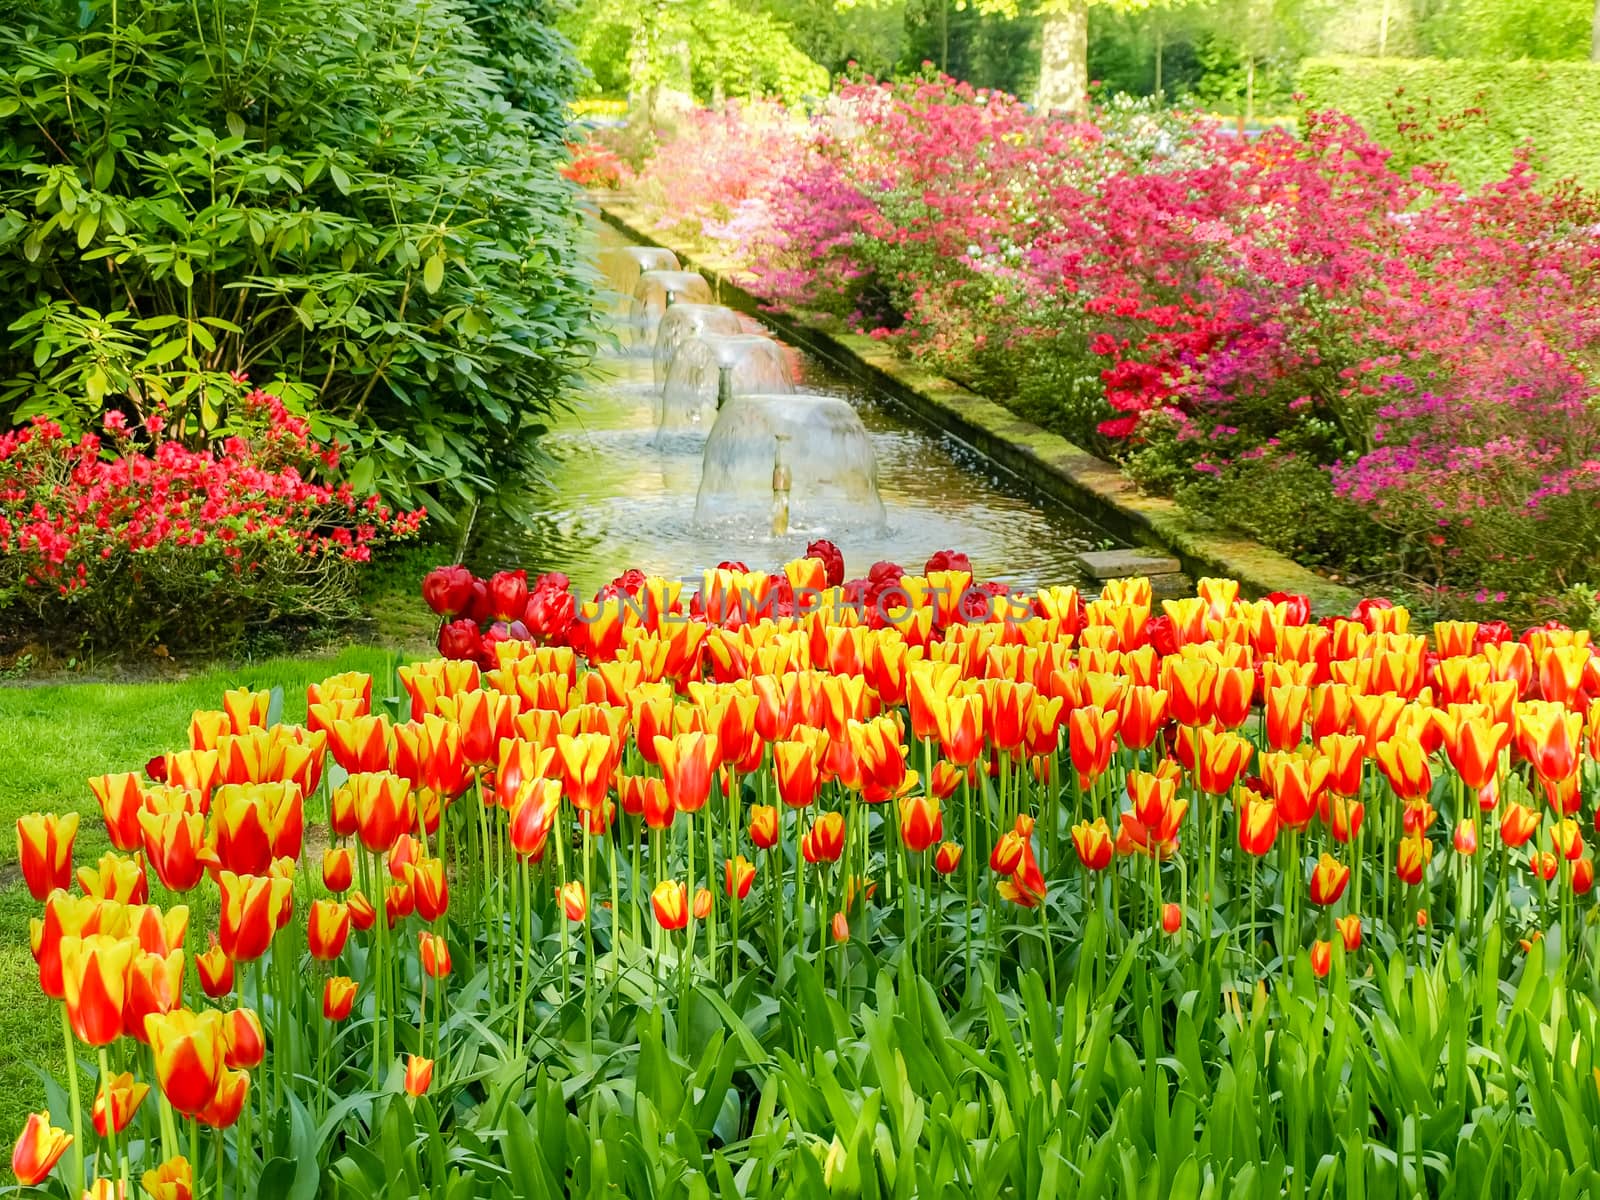 Corner of the garden with flowering plants, small reservoir and red-yellow tulips in the foreground in Keukenhof Park
